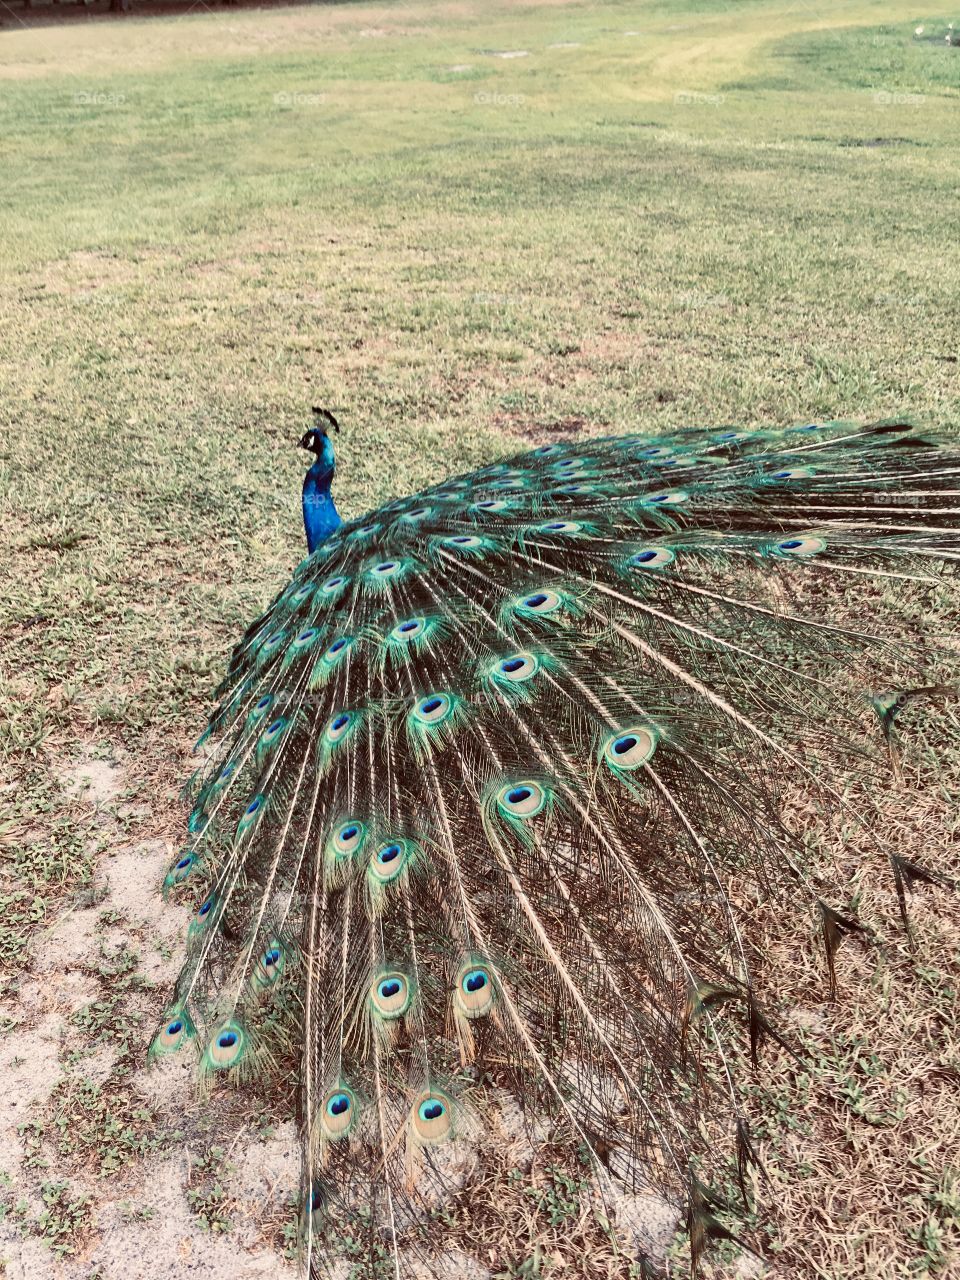 A beautiful peacock in a field of green grass in Florida 